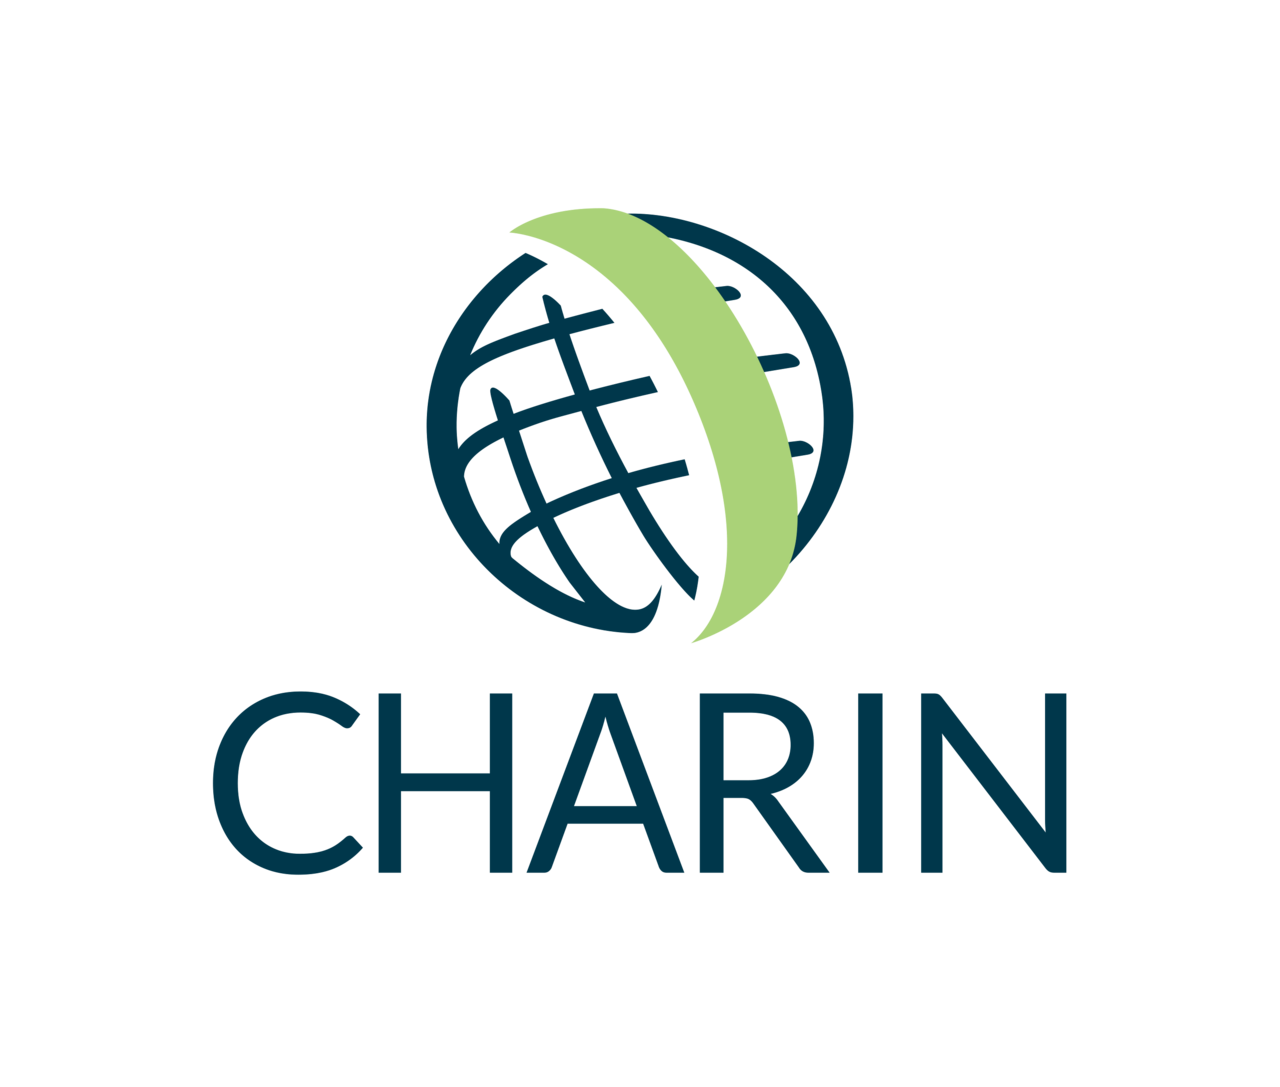 CharIN and ANAC join hands to drive sustainable mobility in Chile